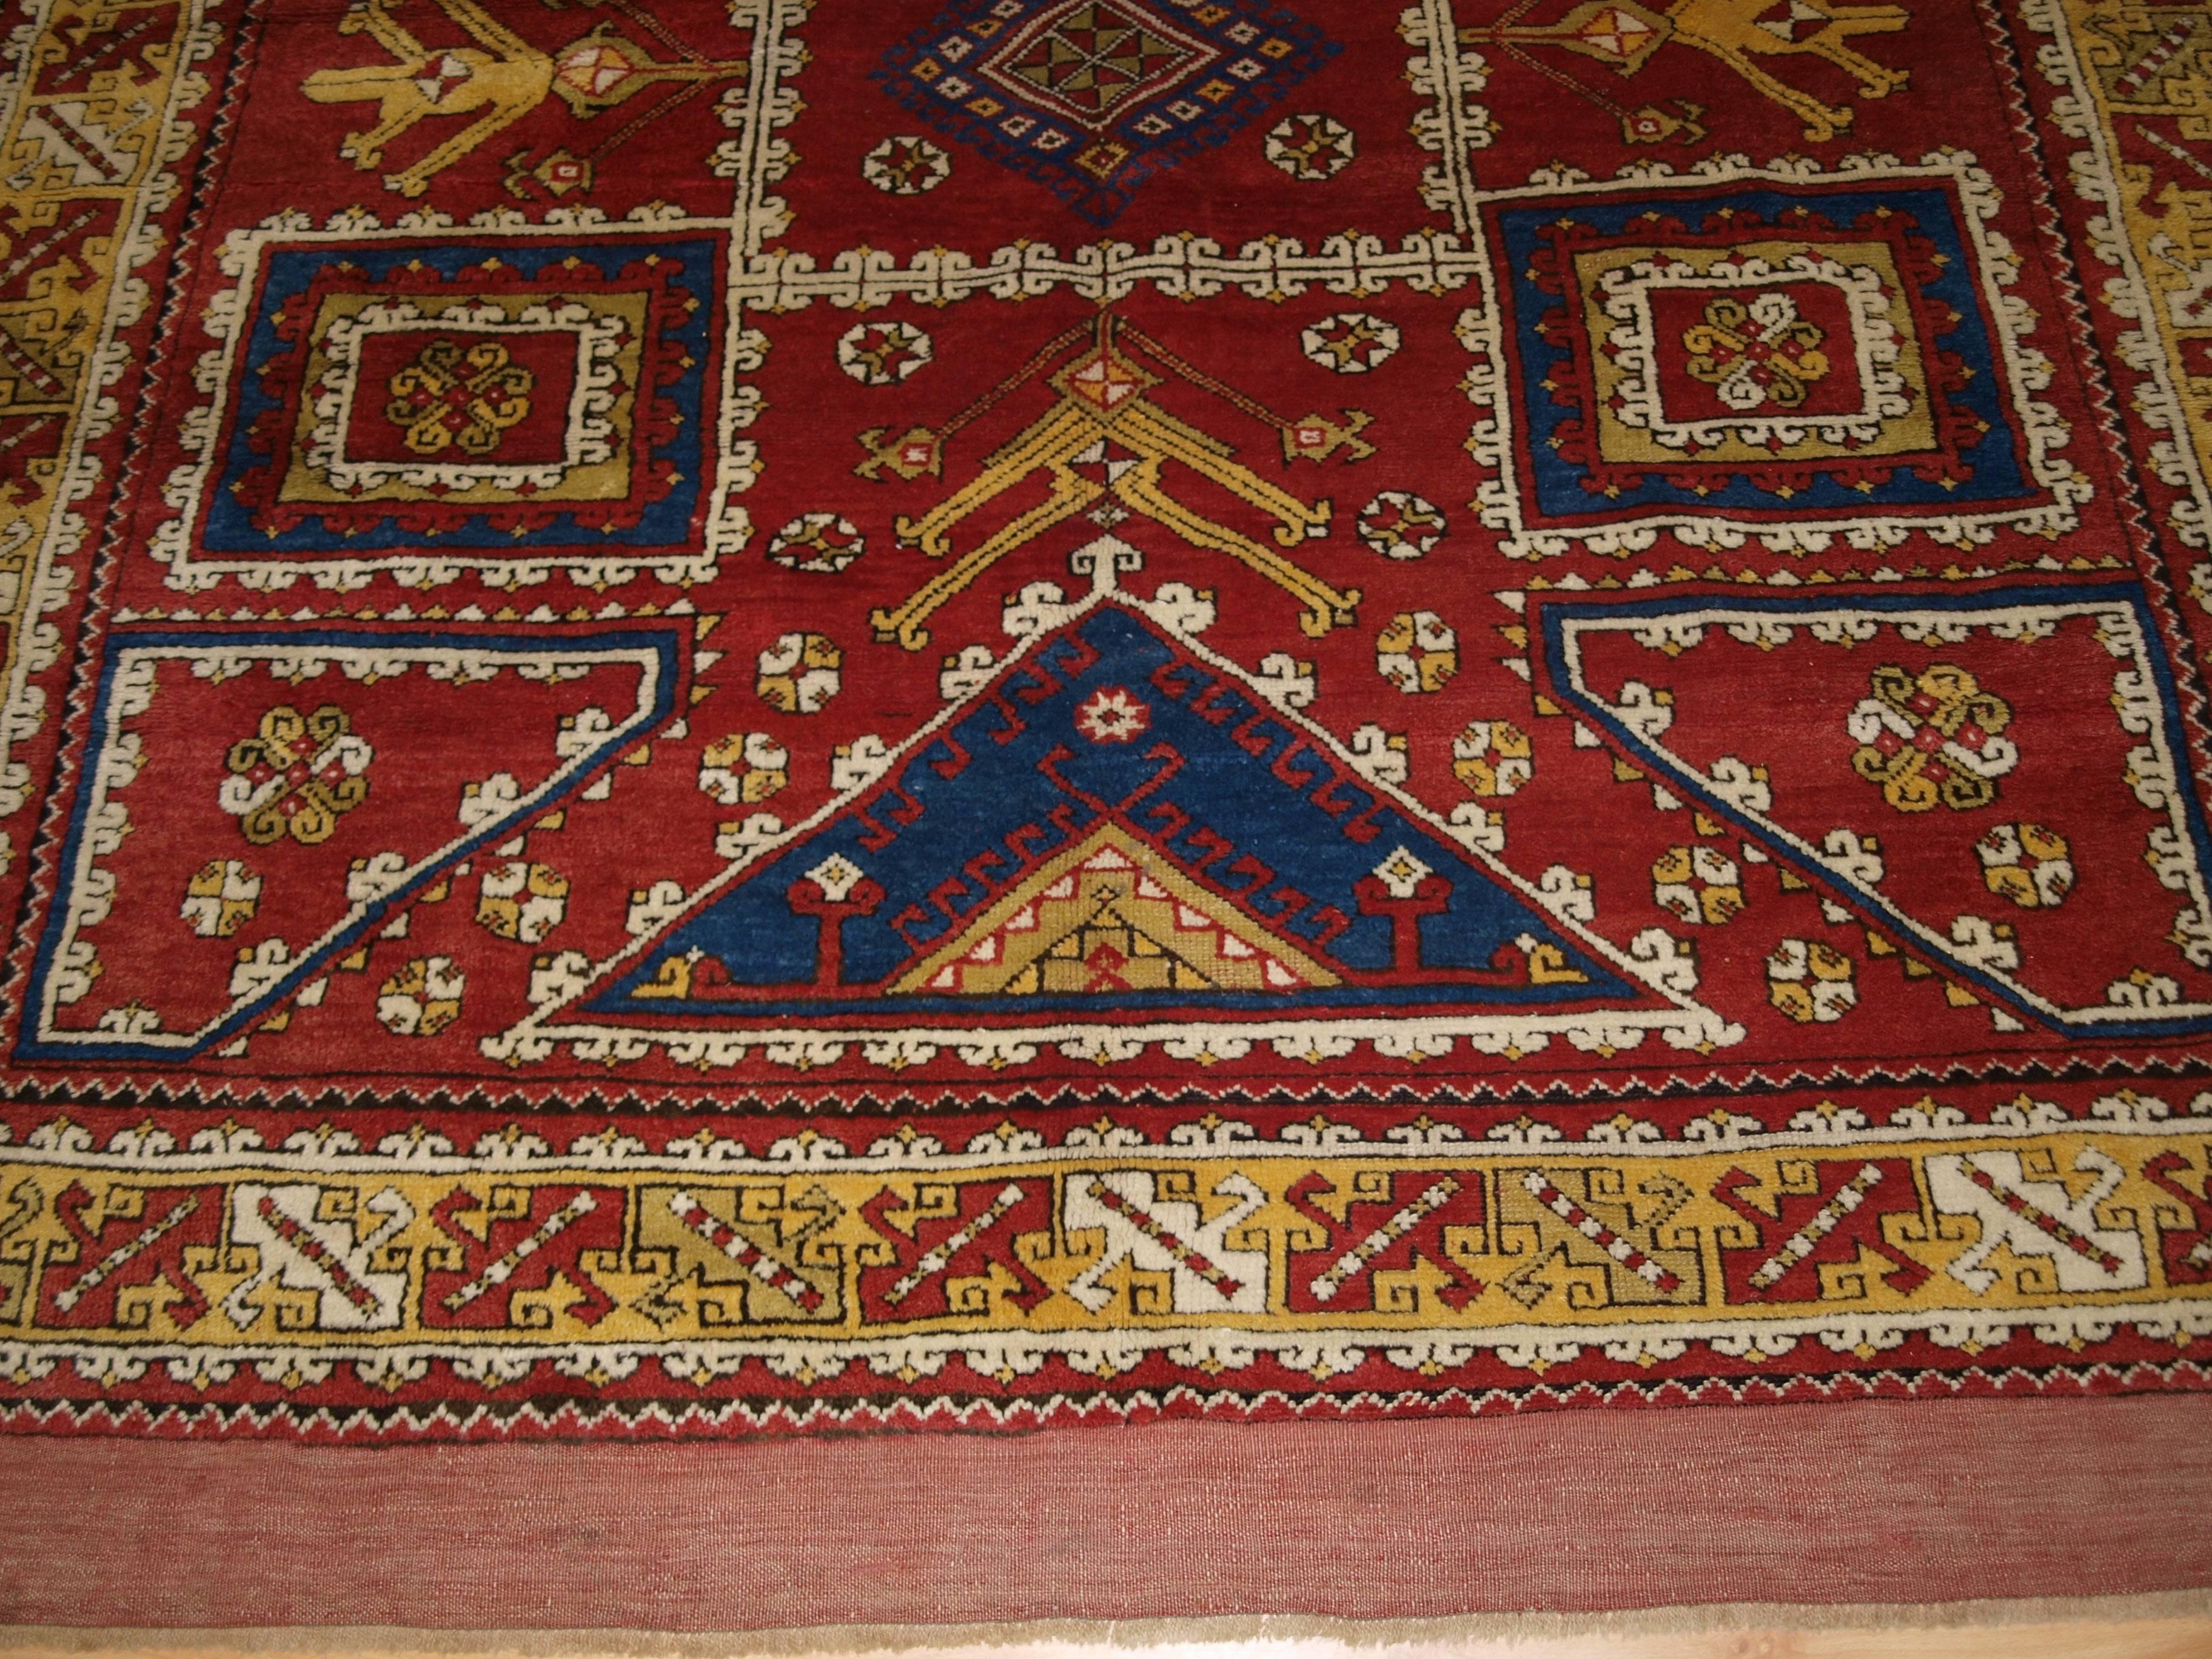 Size: 7ft 9in x 6ft 2in (235 x 187cm).

Antique Turkish Bergama rug of Classic design with superb colour including a very good yellow. The rug is of a Traditional Design from this region,

circa 1900.

The rug has very soft wool and a very